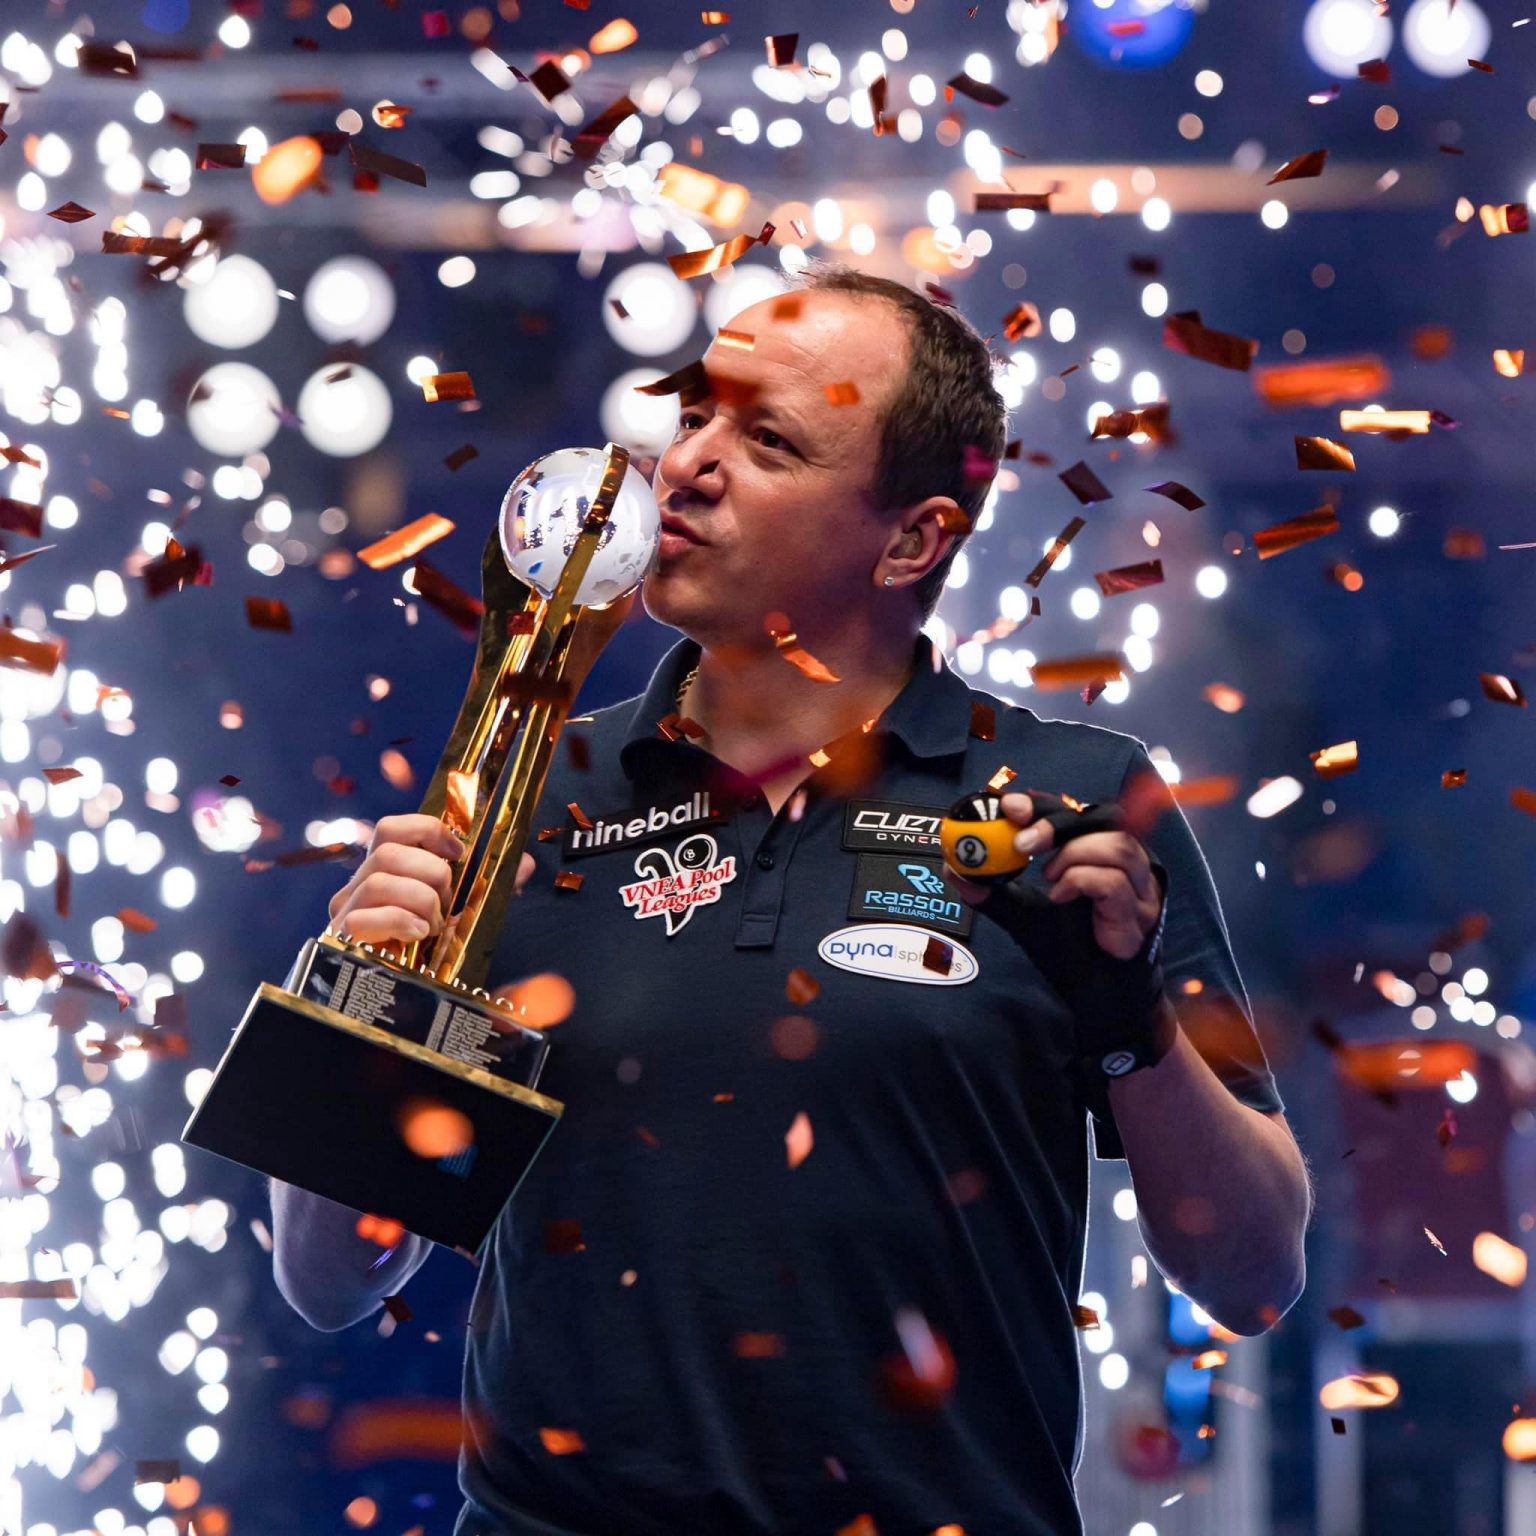 Shane Van Boening is 9 Ball Champion of the world Dynaspheres™